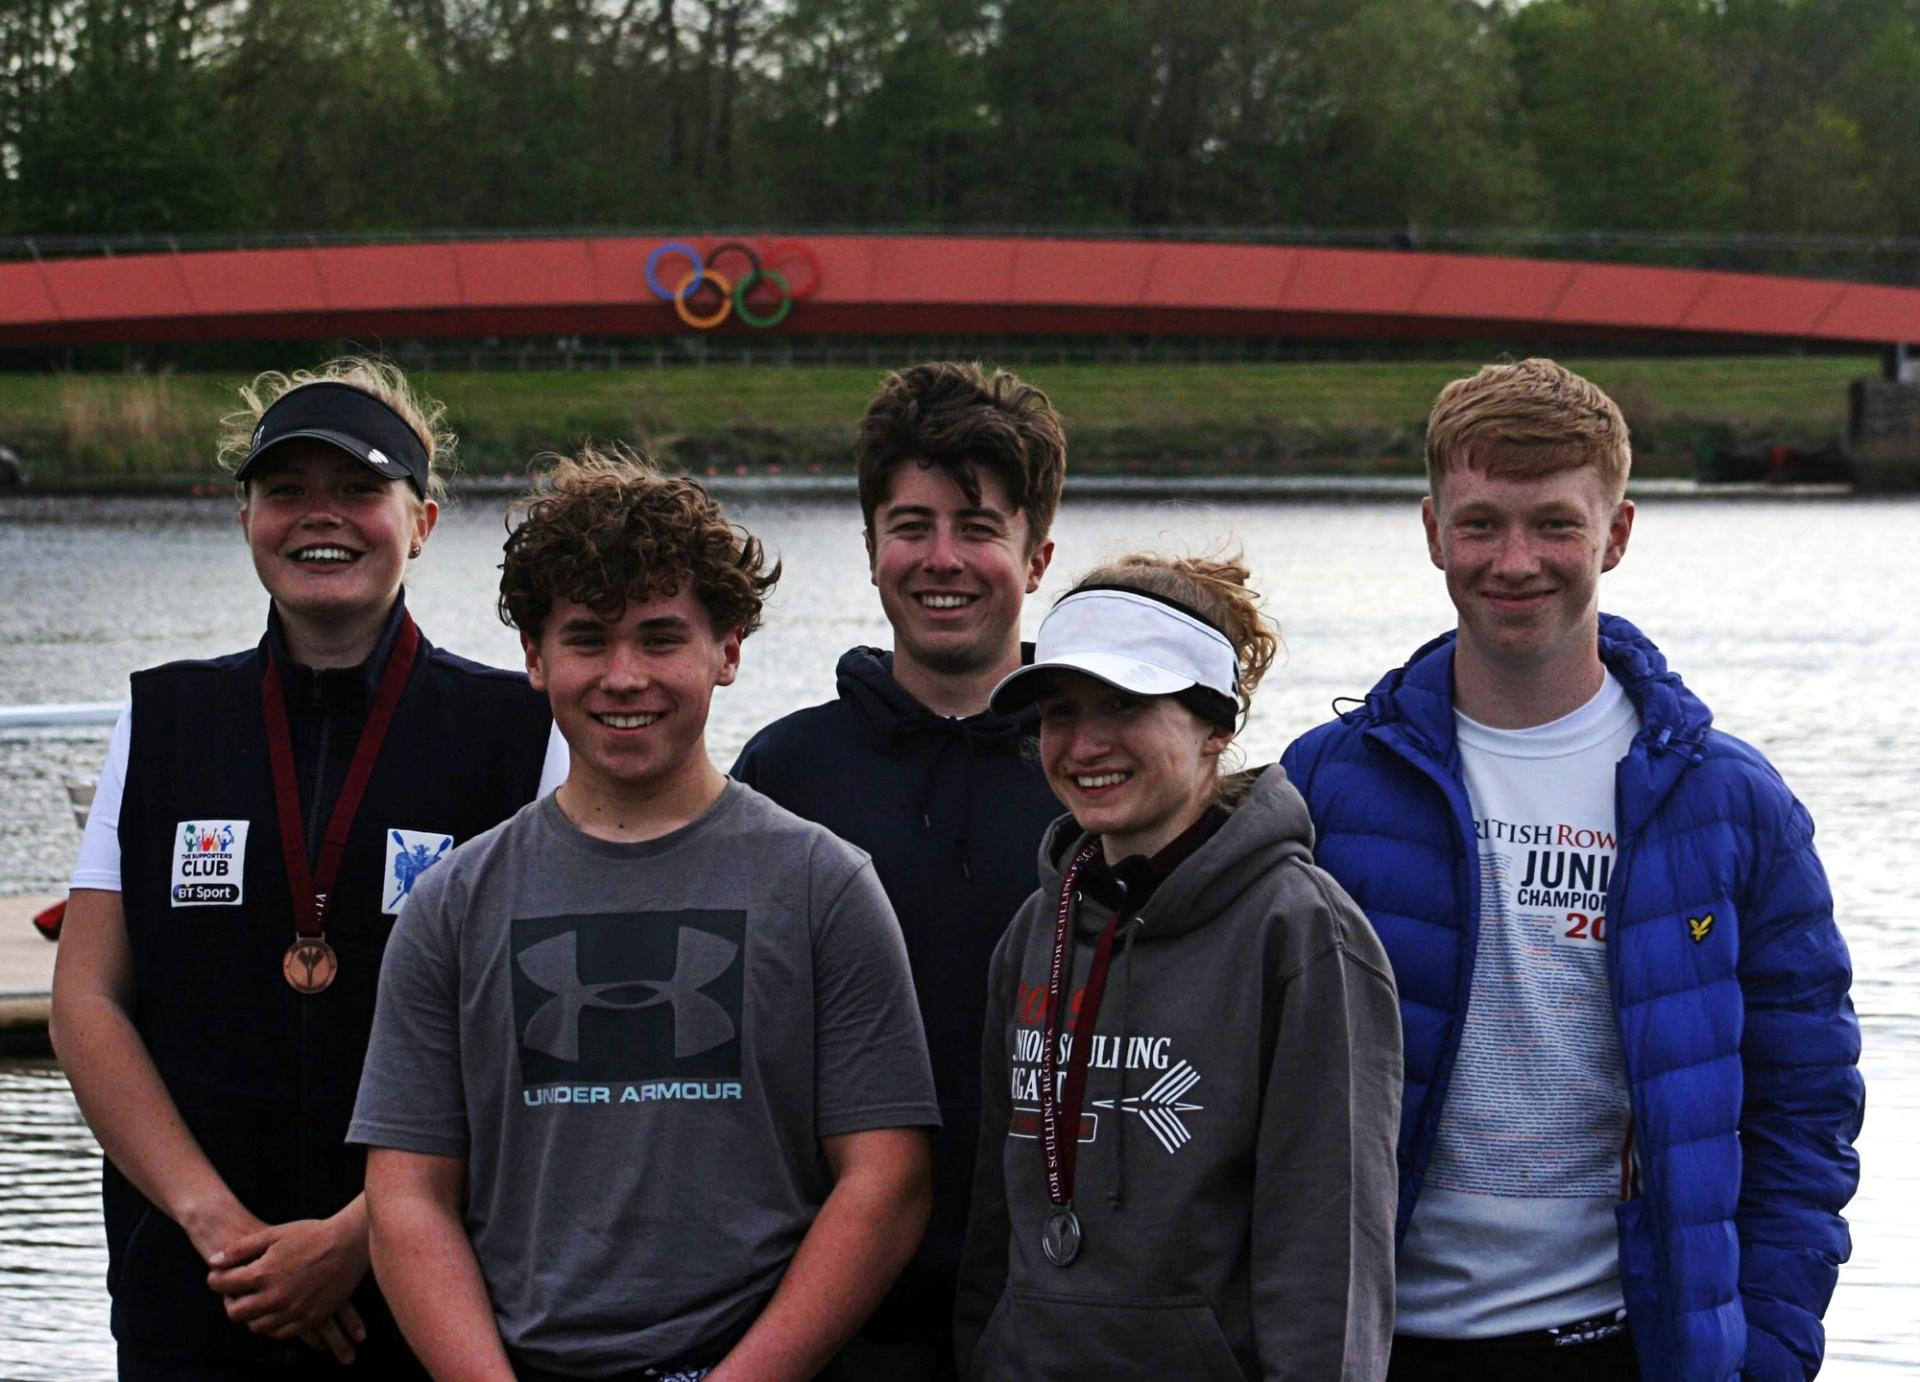 From left to right: Martha Bullen, Harry Moule, Byron Bullen, Amelia Moule and Sam McLoughlin, at Dorney Lake.